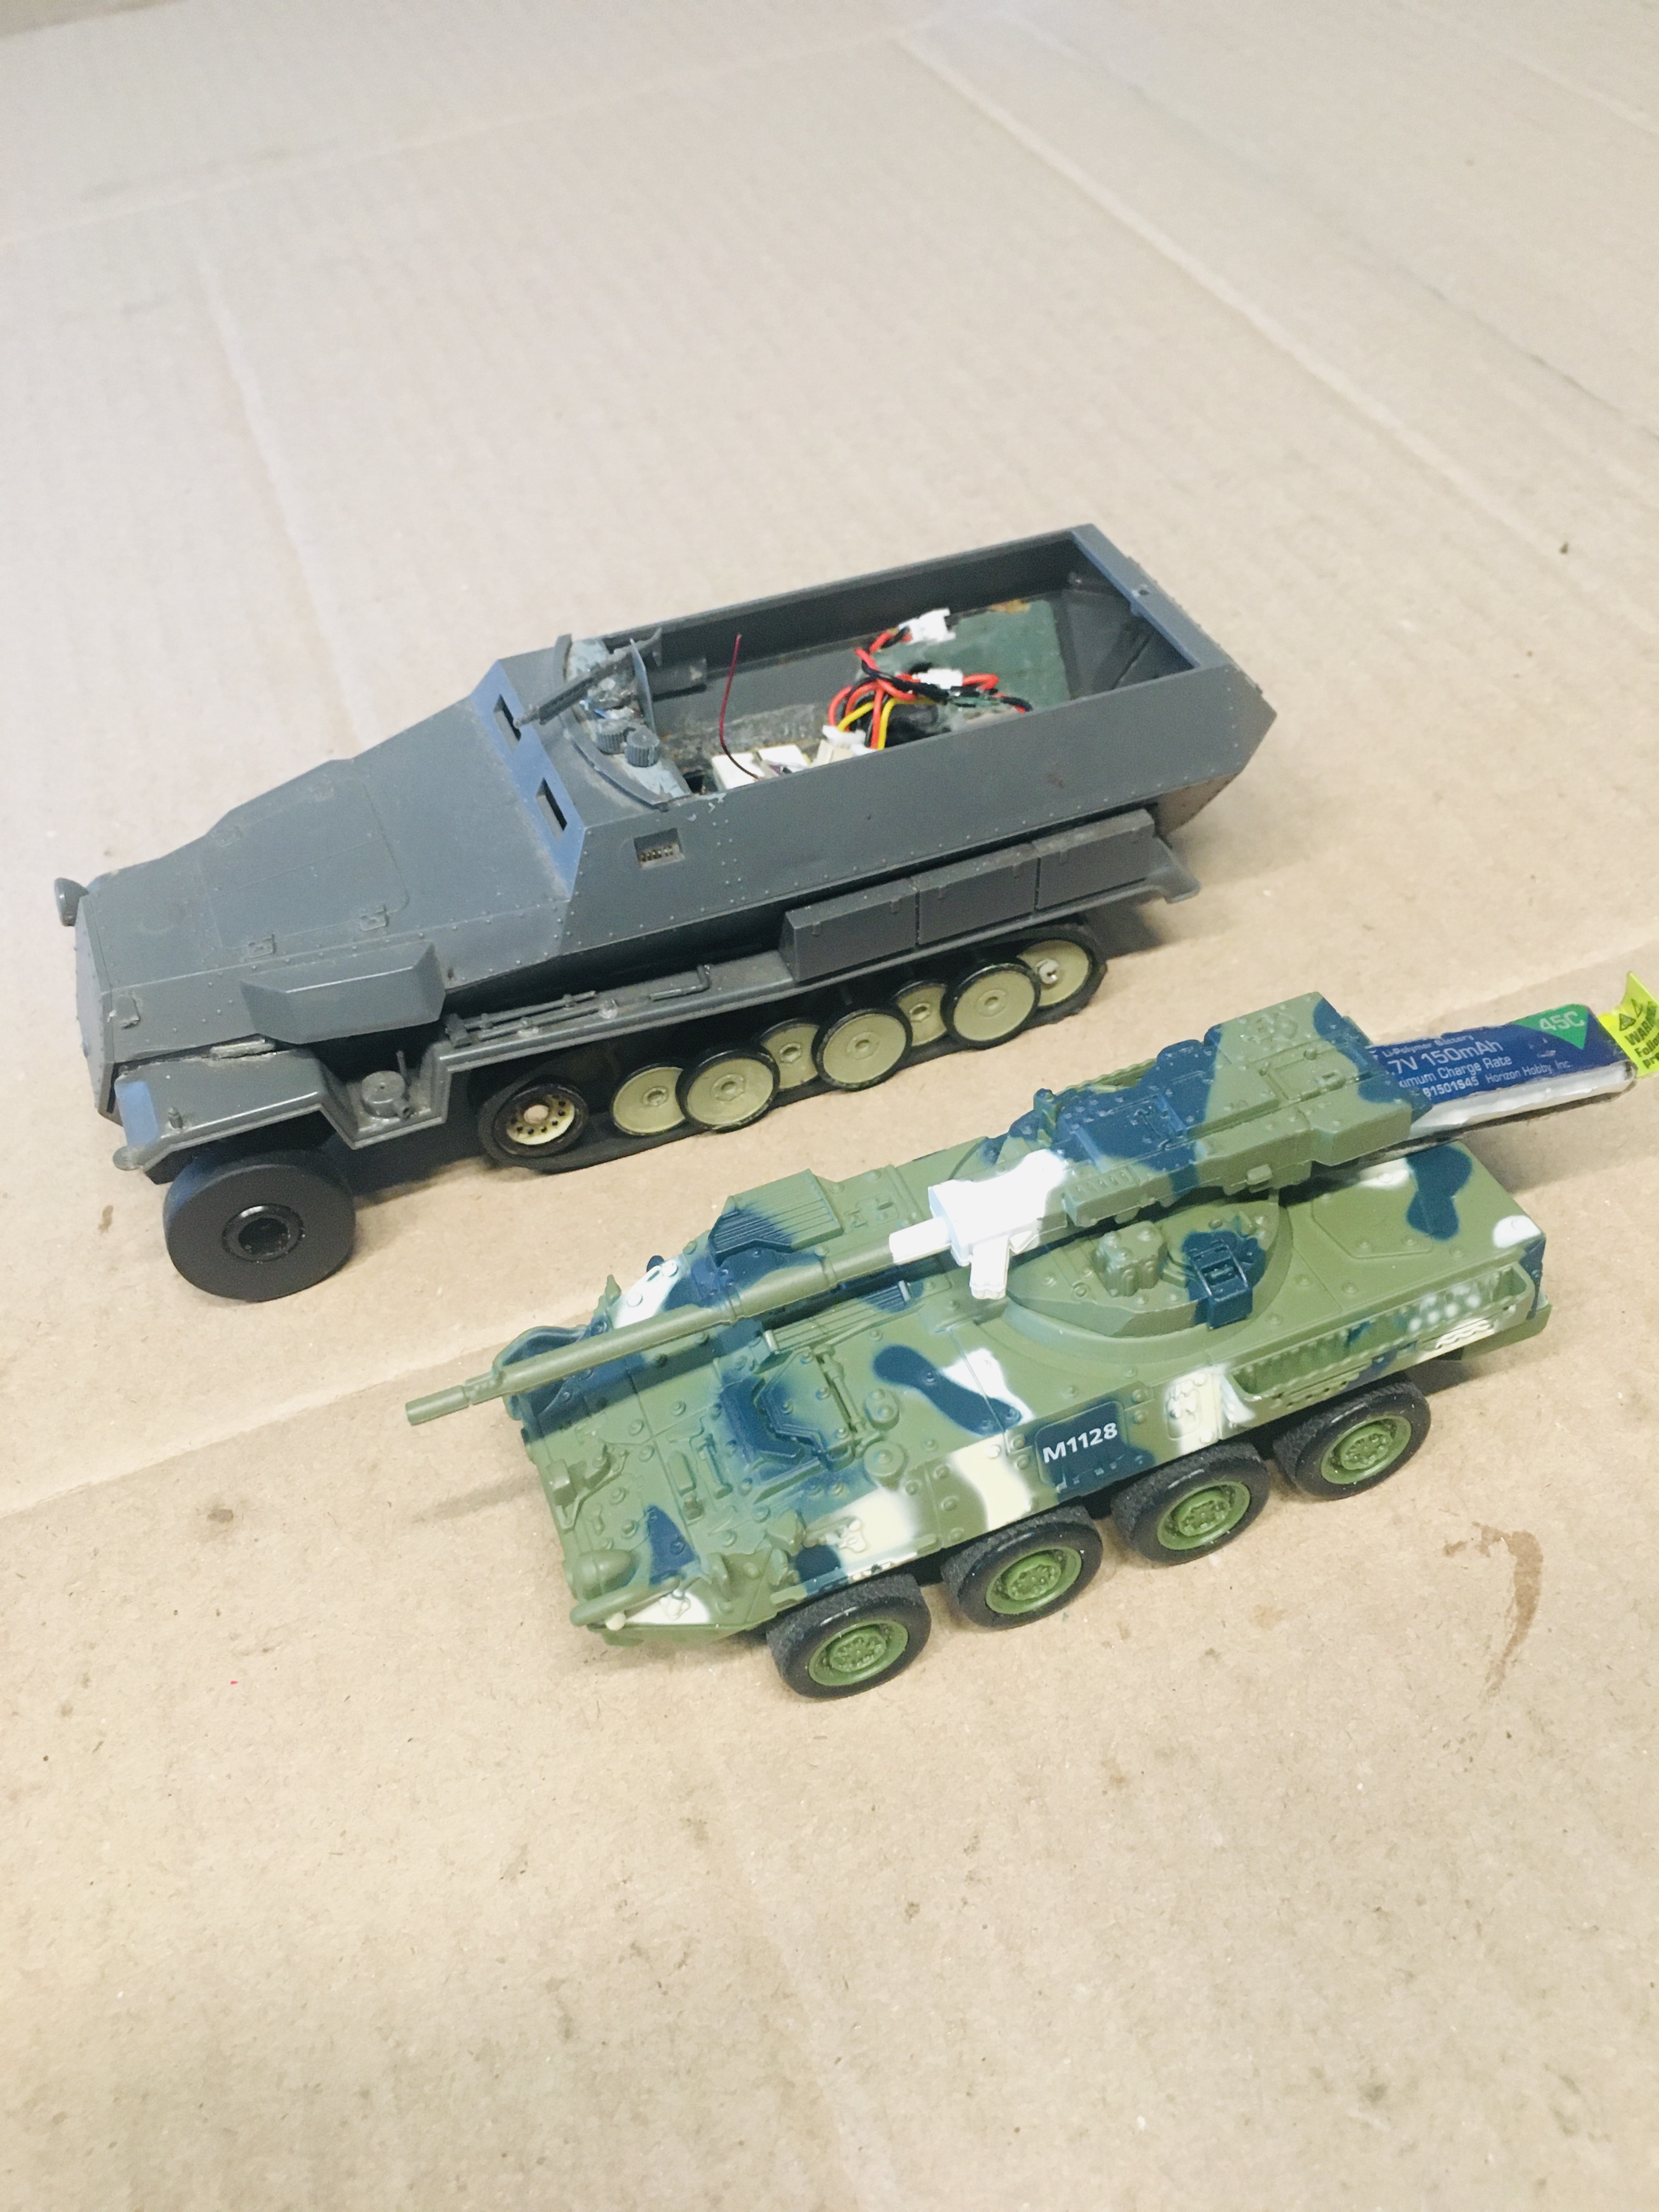 I am beginning to wonder what is the actual scale of this M1128 Stryker..Next to a 1/35 Hanomag.